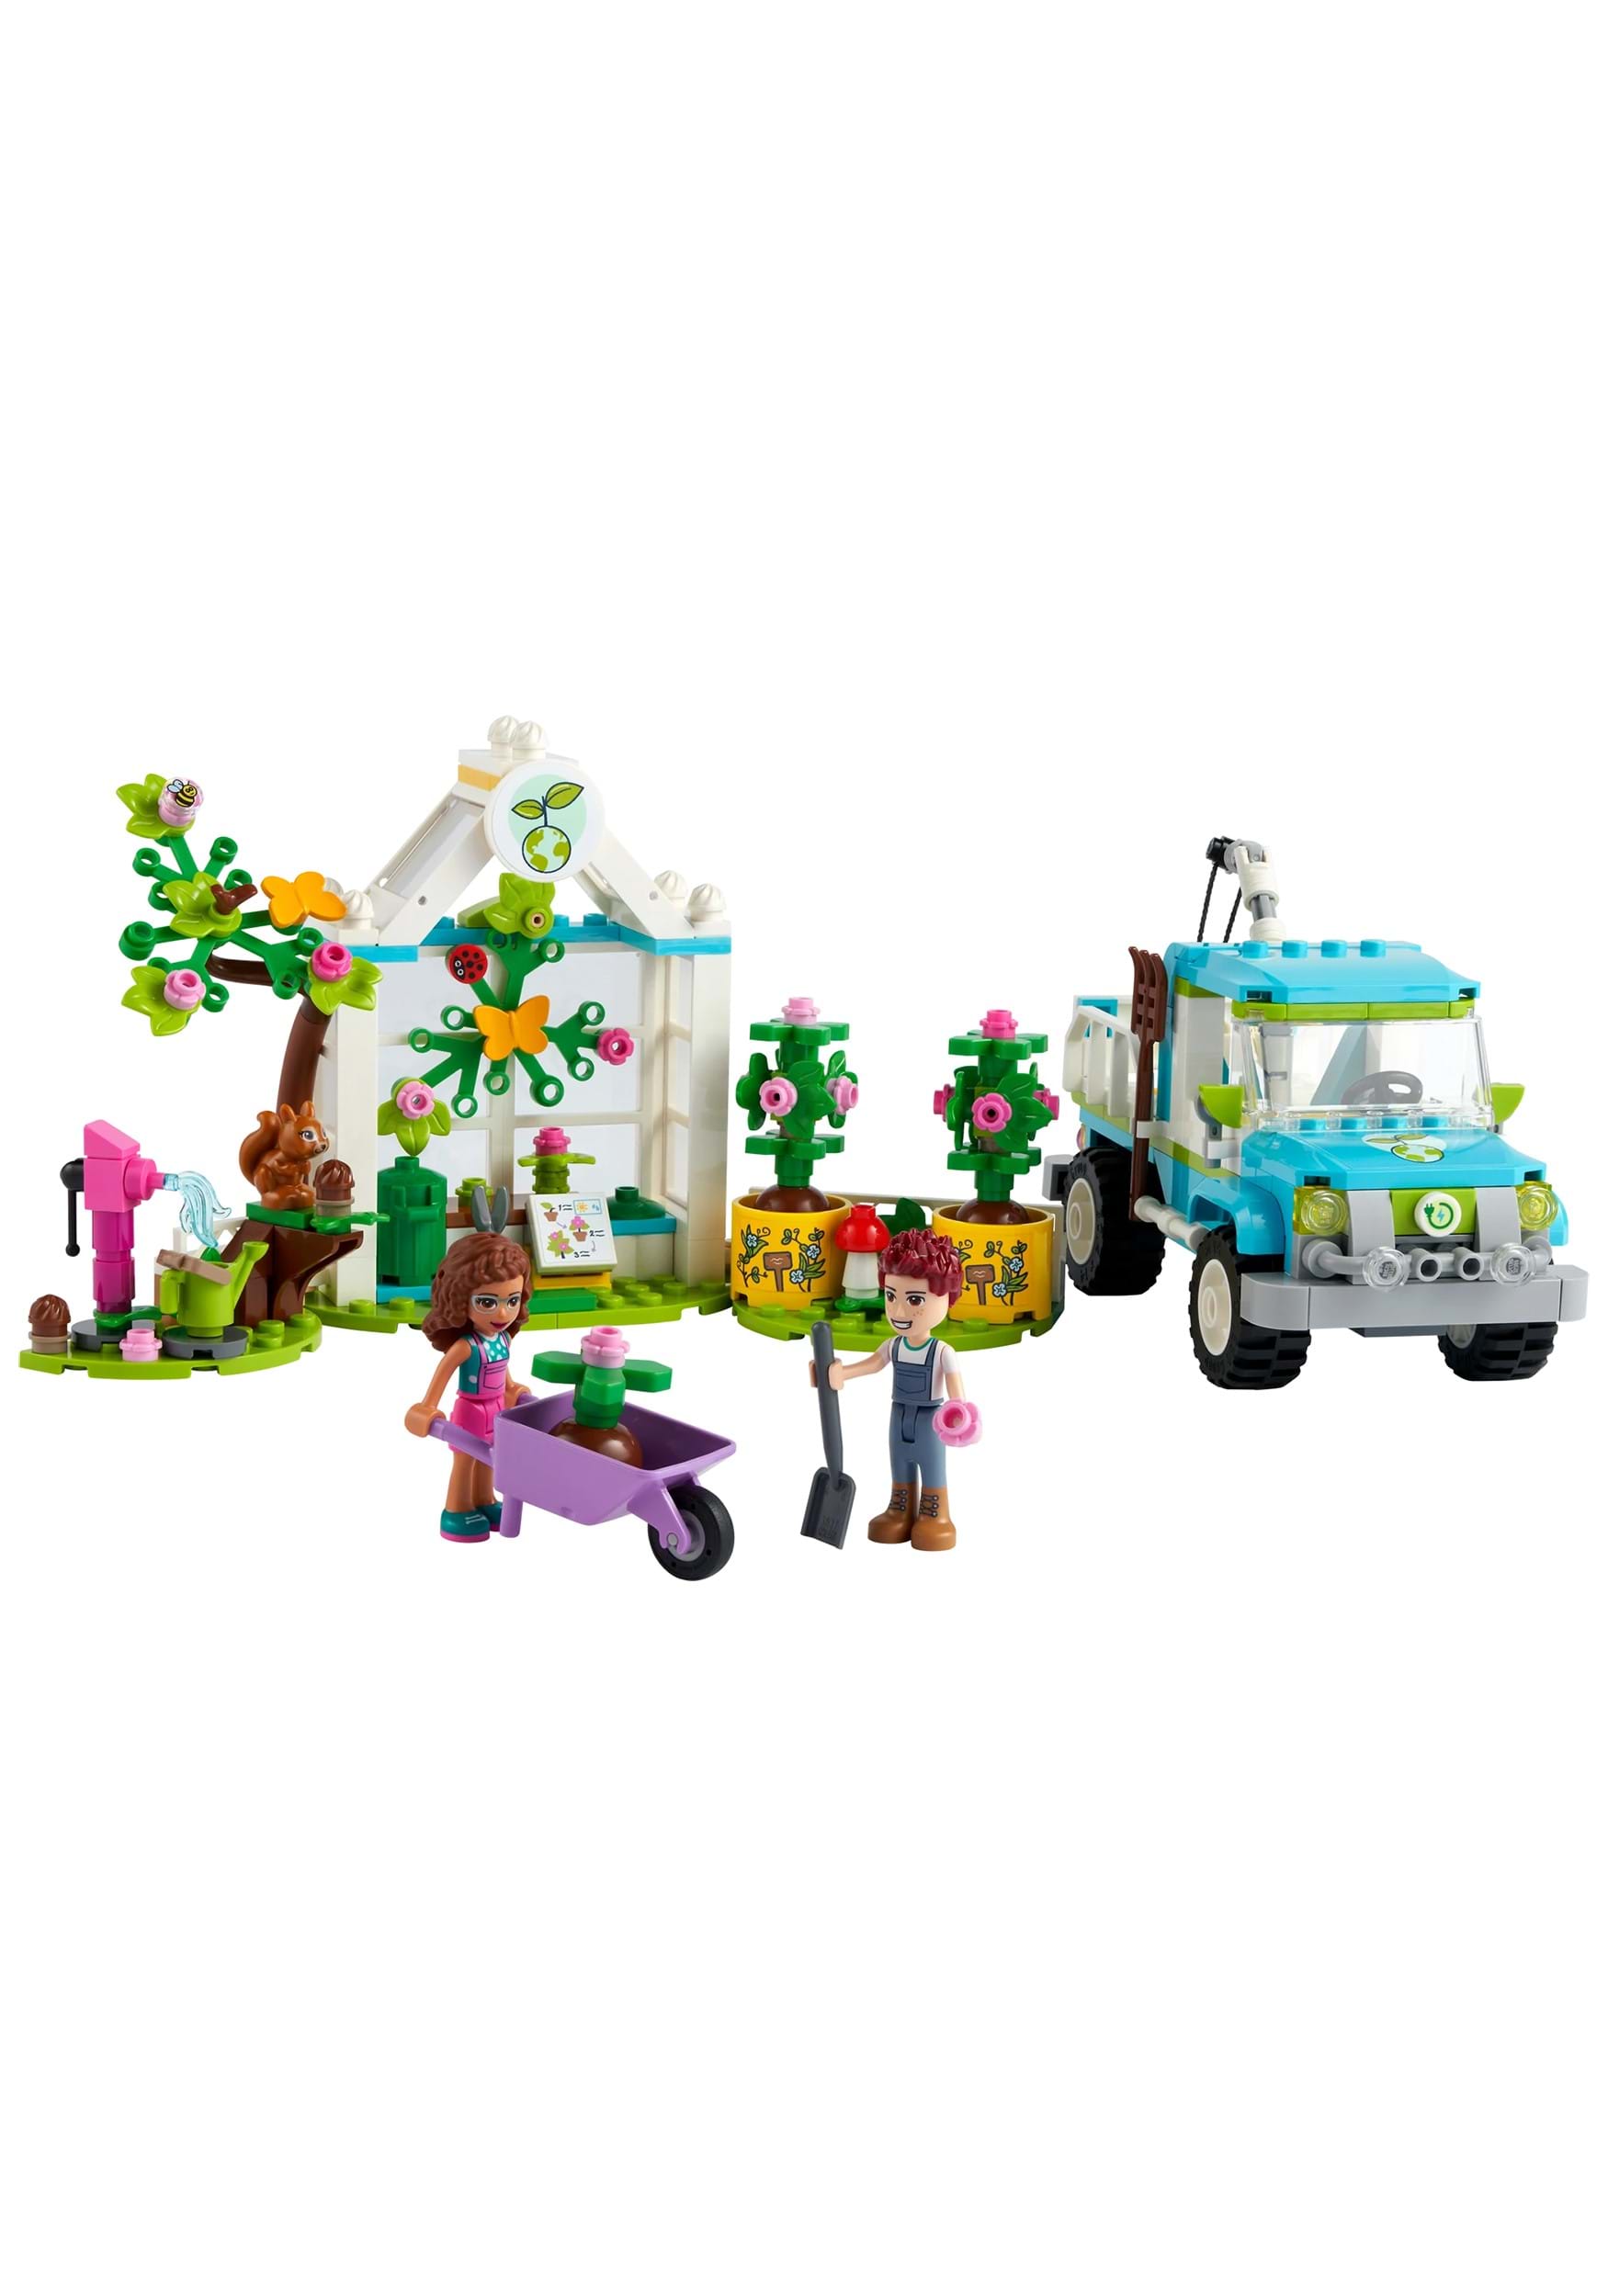 LEGO Friends Tree-Planting Off Road Vehicle